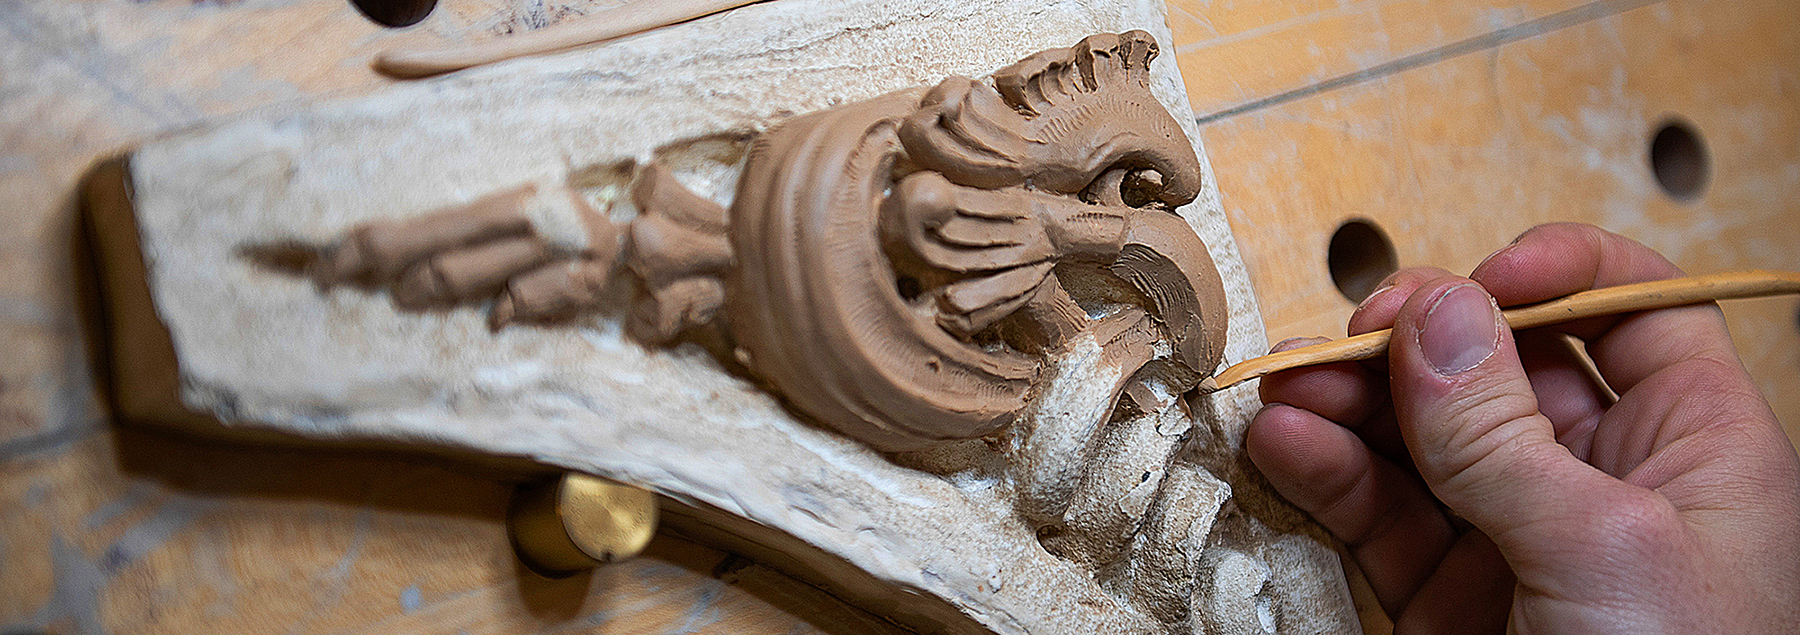 A closeup of a hand shaping a carving of a cockatrice using a clay-sculpting tool.